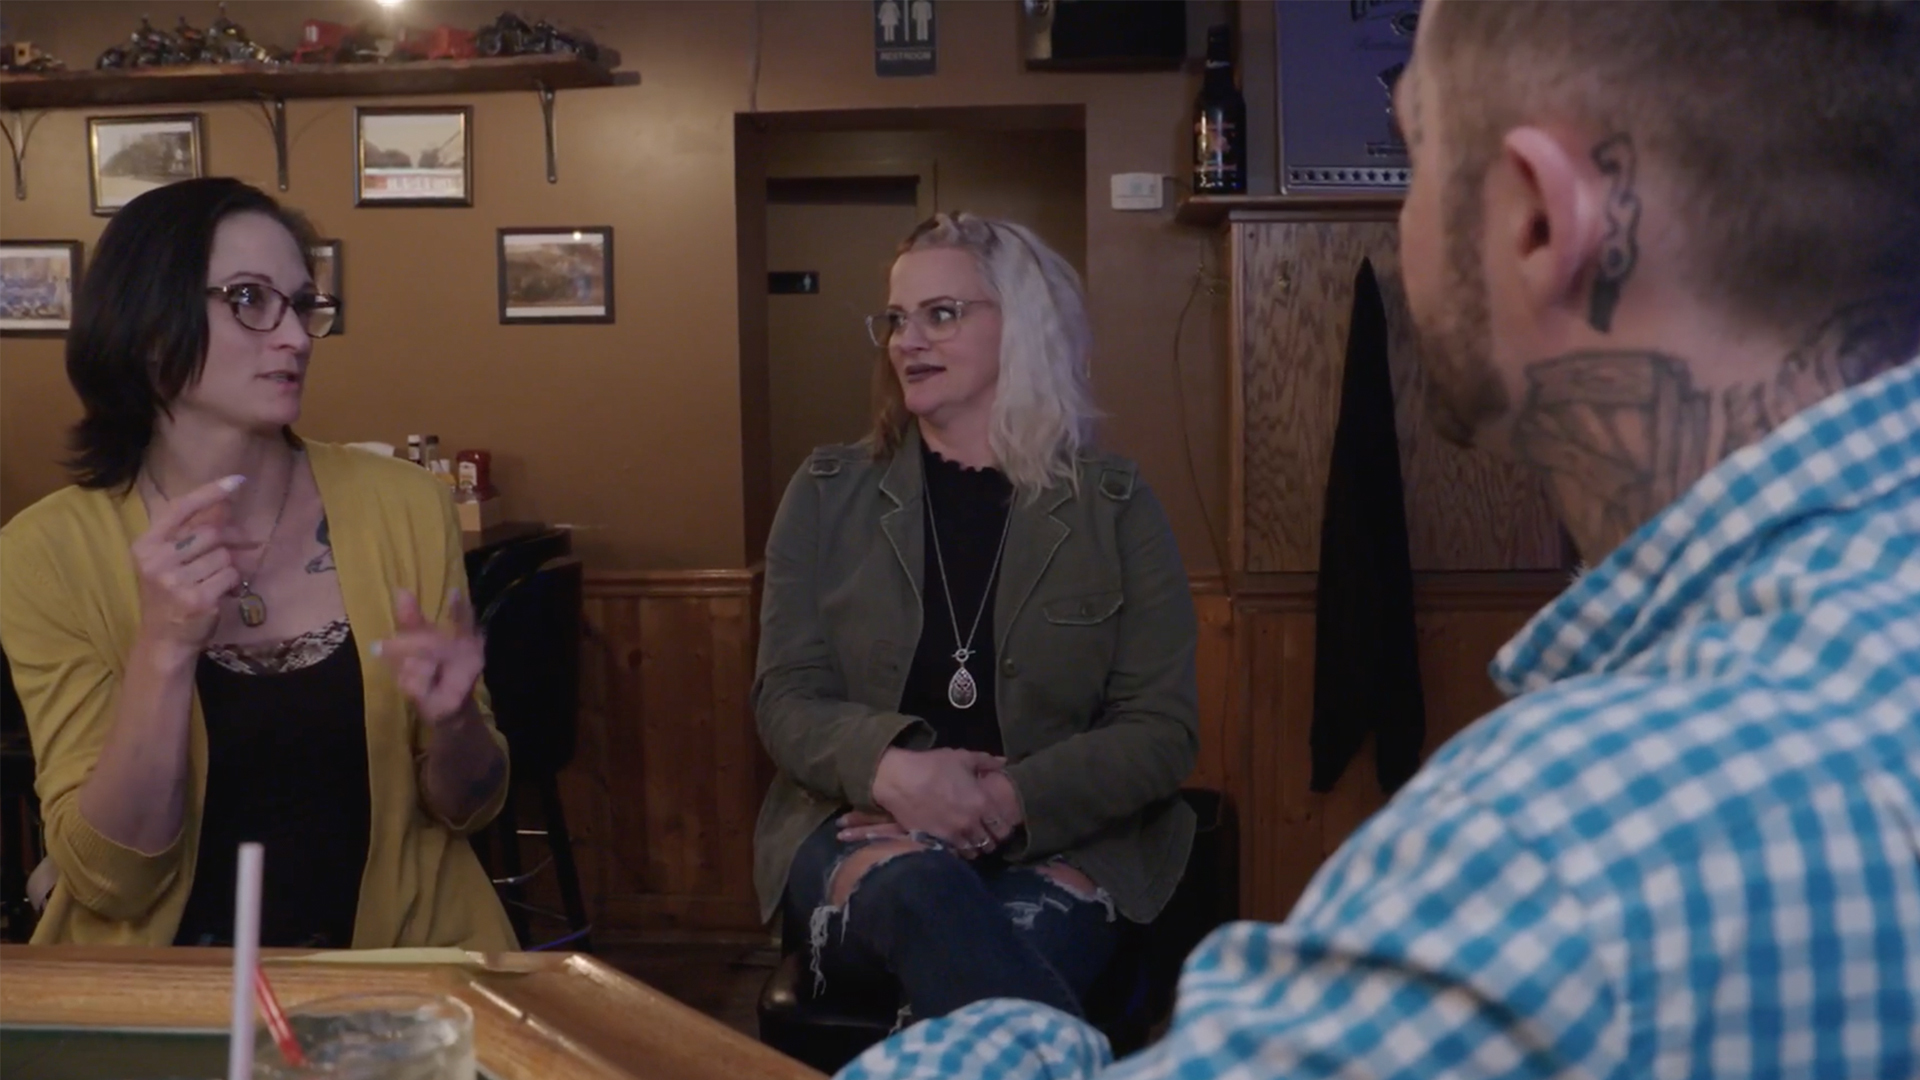 Watch Deleted Scene: Chelsea’s Friends Grill Her About Mikey | Love During Lockup Video Extras